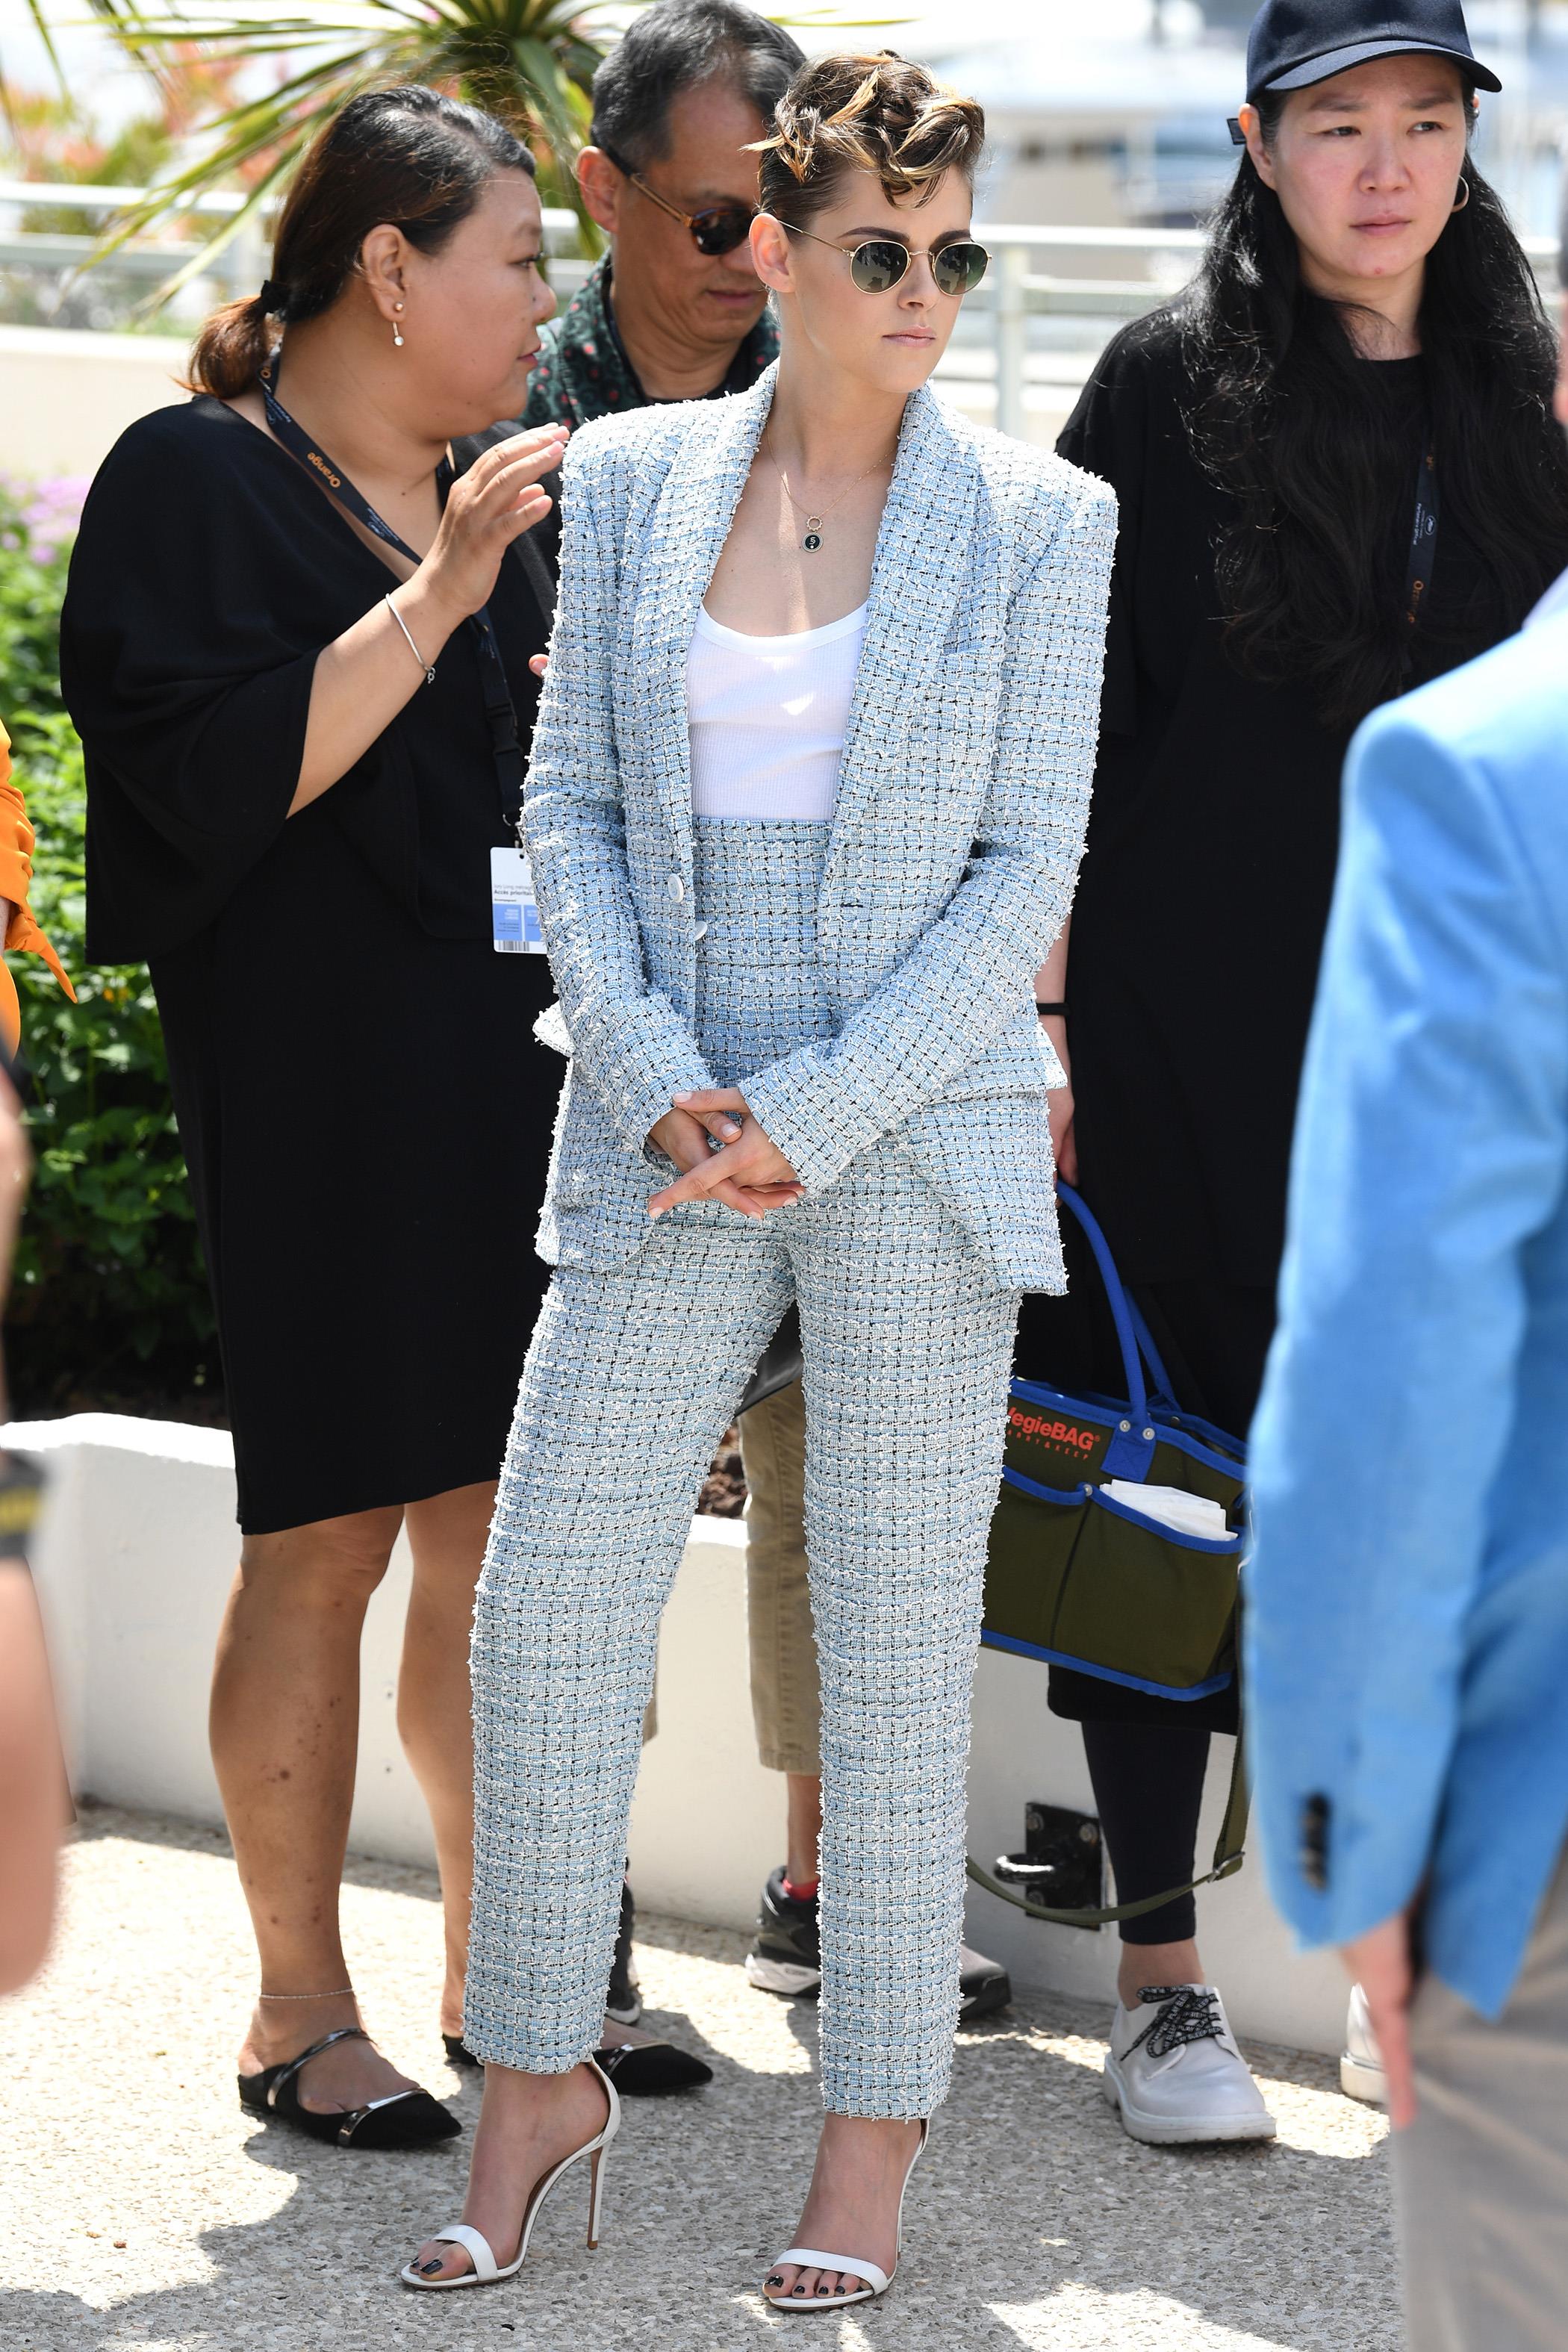 Kristen Stewart in a Chanel Tweed Pantsuit at the Cannes Film